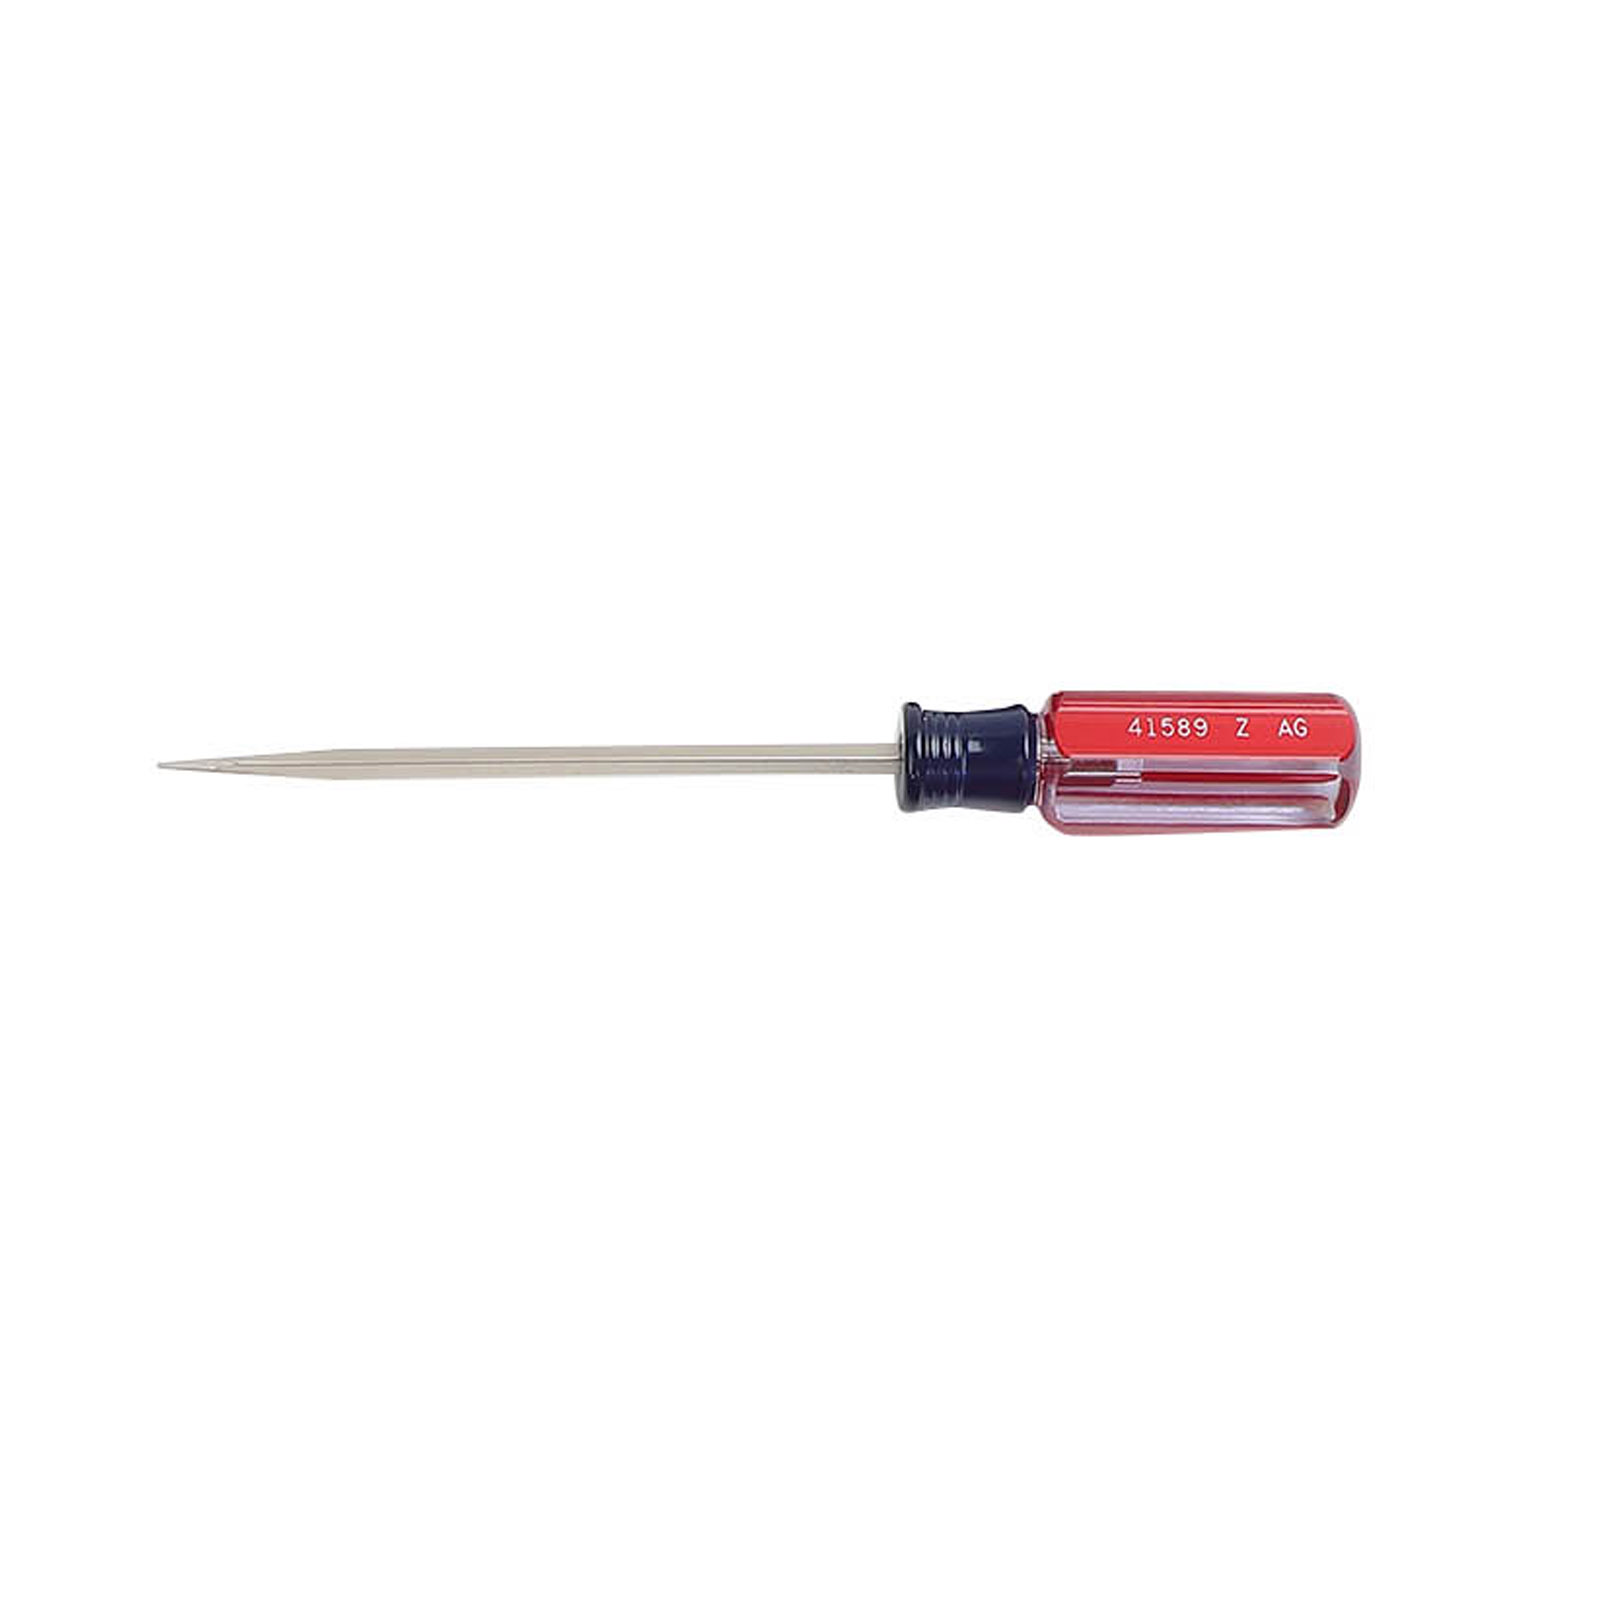 Craftsman Slotted 1/8 X 4IN Screwdriver